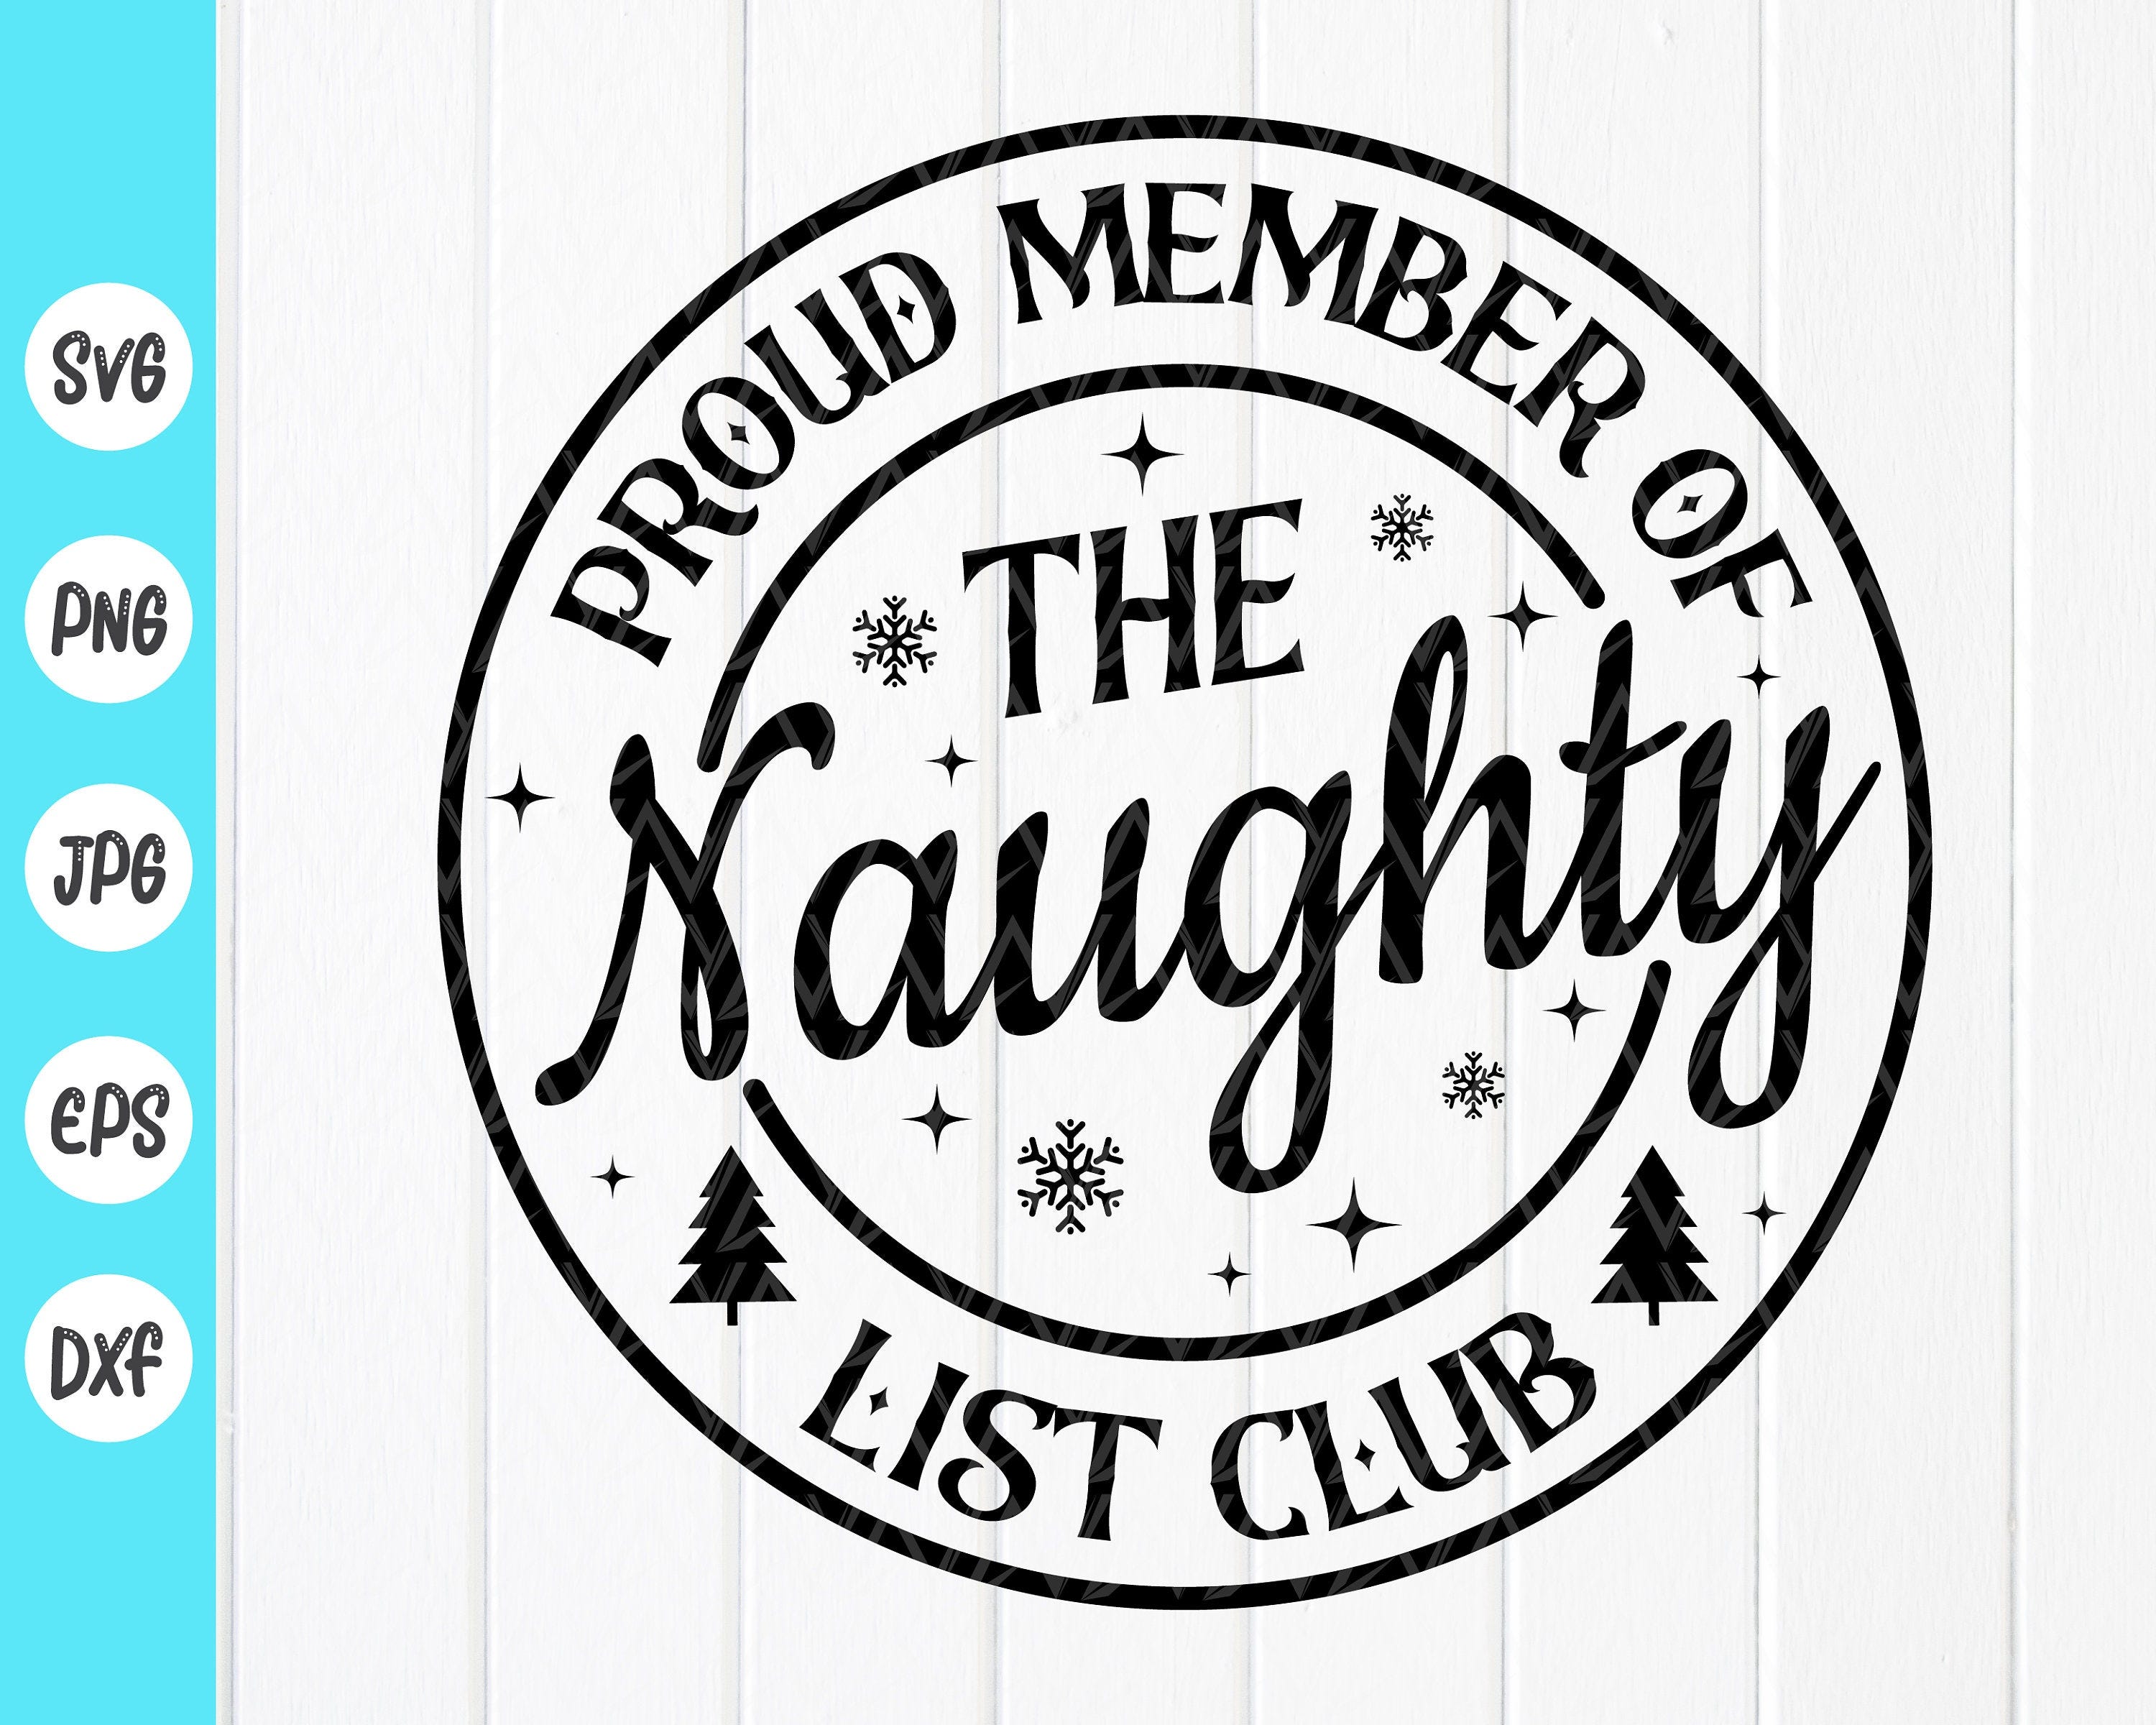 Proud Member Of The Naughty List Club Svg,Christmas Svg, Funny Christmas Svg,Merry Christmas svg, Digital Files Instant Download For Cricut